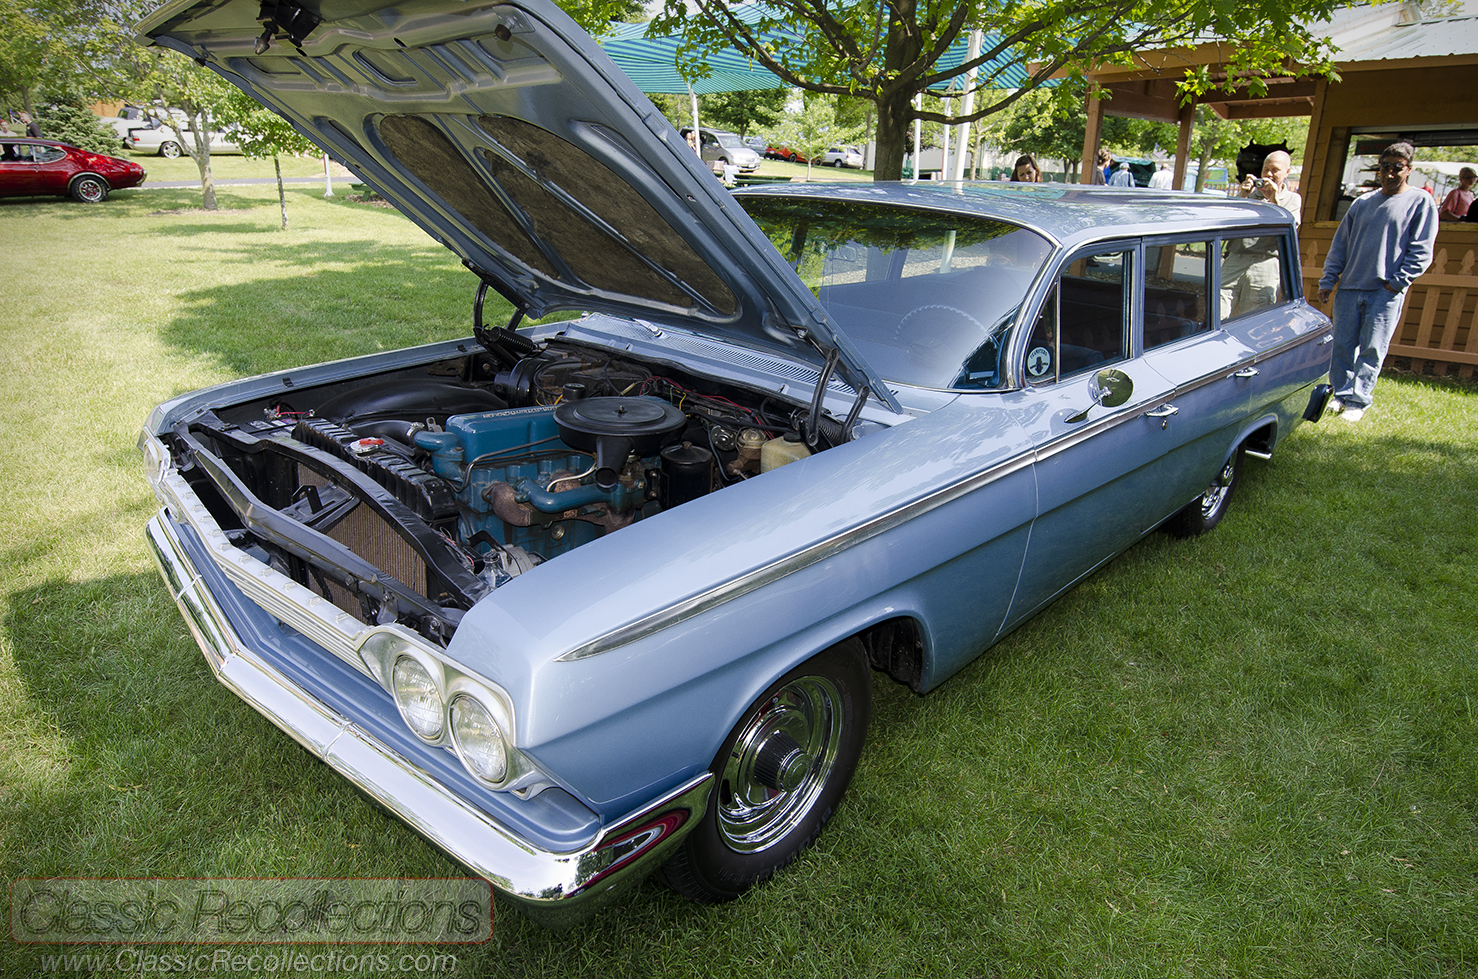 FEATURE: 1962 Chevrolet Bel Air 9-Passenger Wagon – Classic Recollections